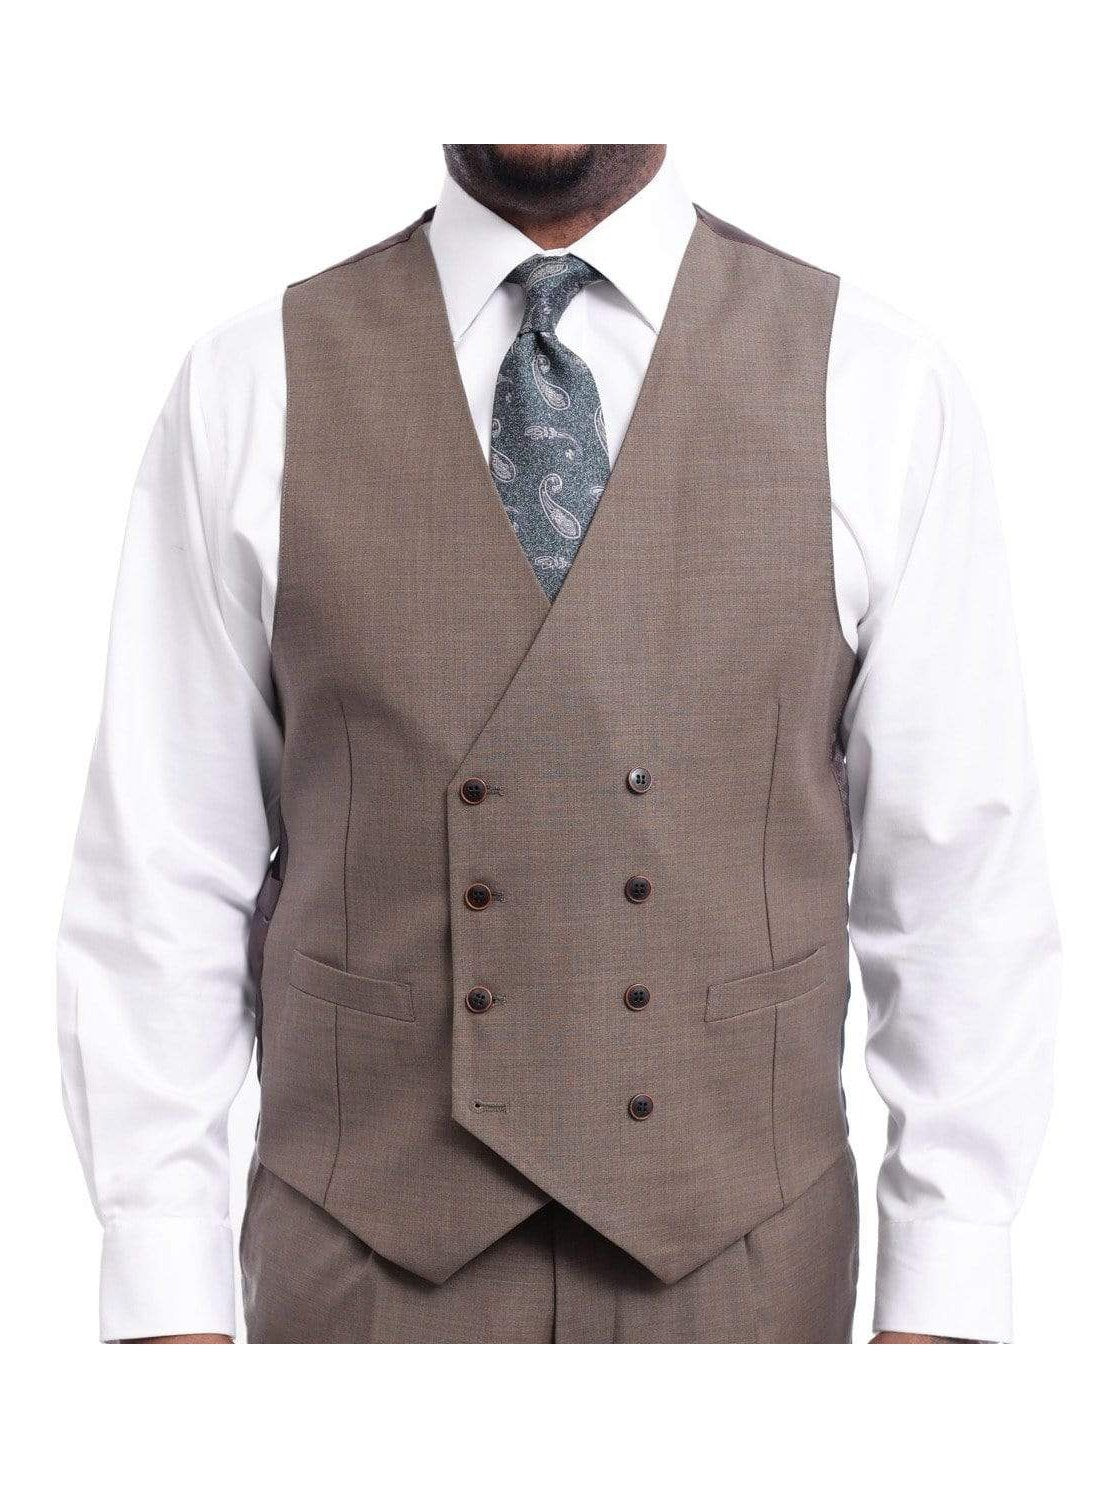 Arthur Black THREE PIECE SUITS Arthur Black Classic Fit Solid Heather Olive Green Three Piece Wool Suit